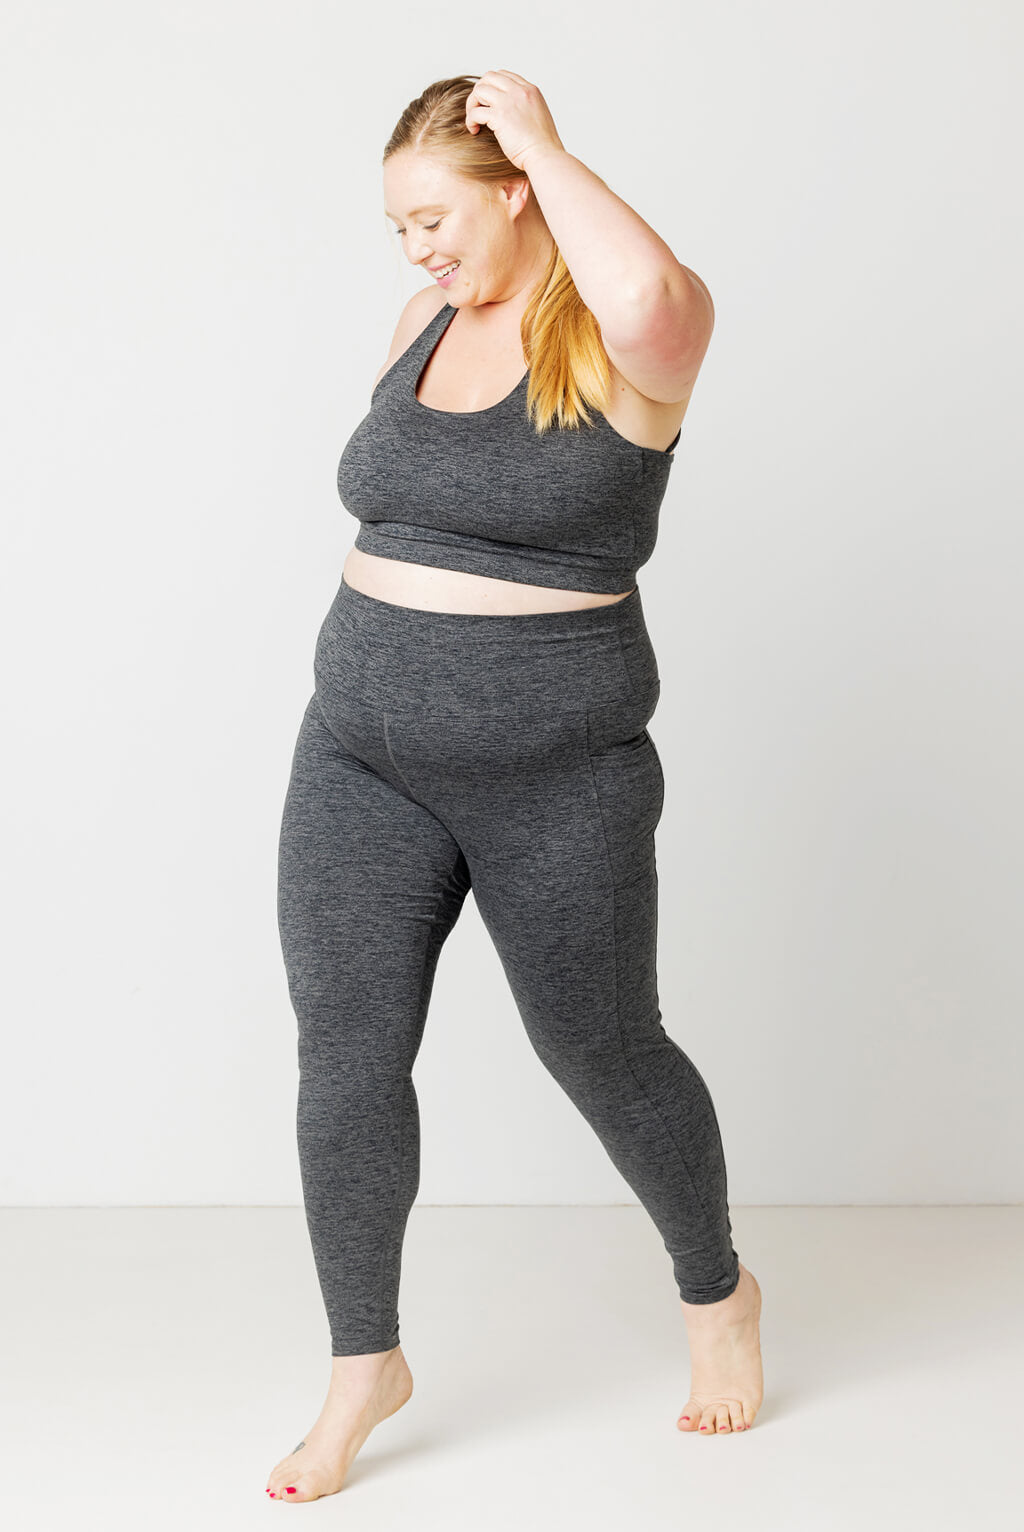 2X model posing in Superfit Hero plus size SuperSoft leggings with pockets